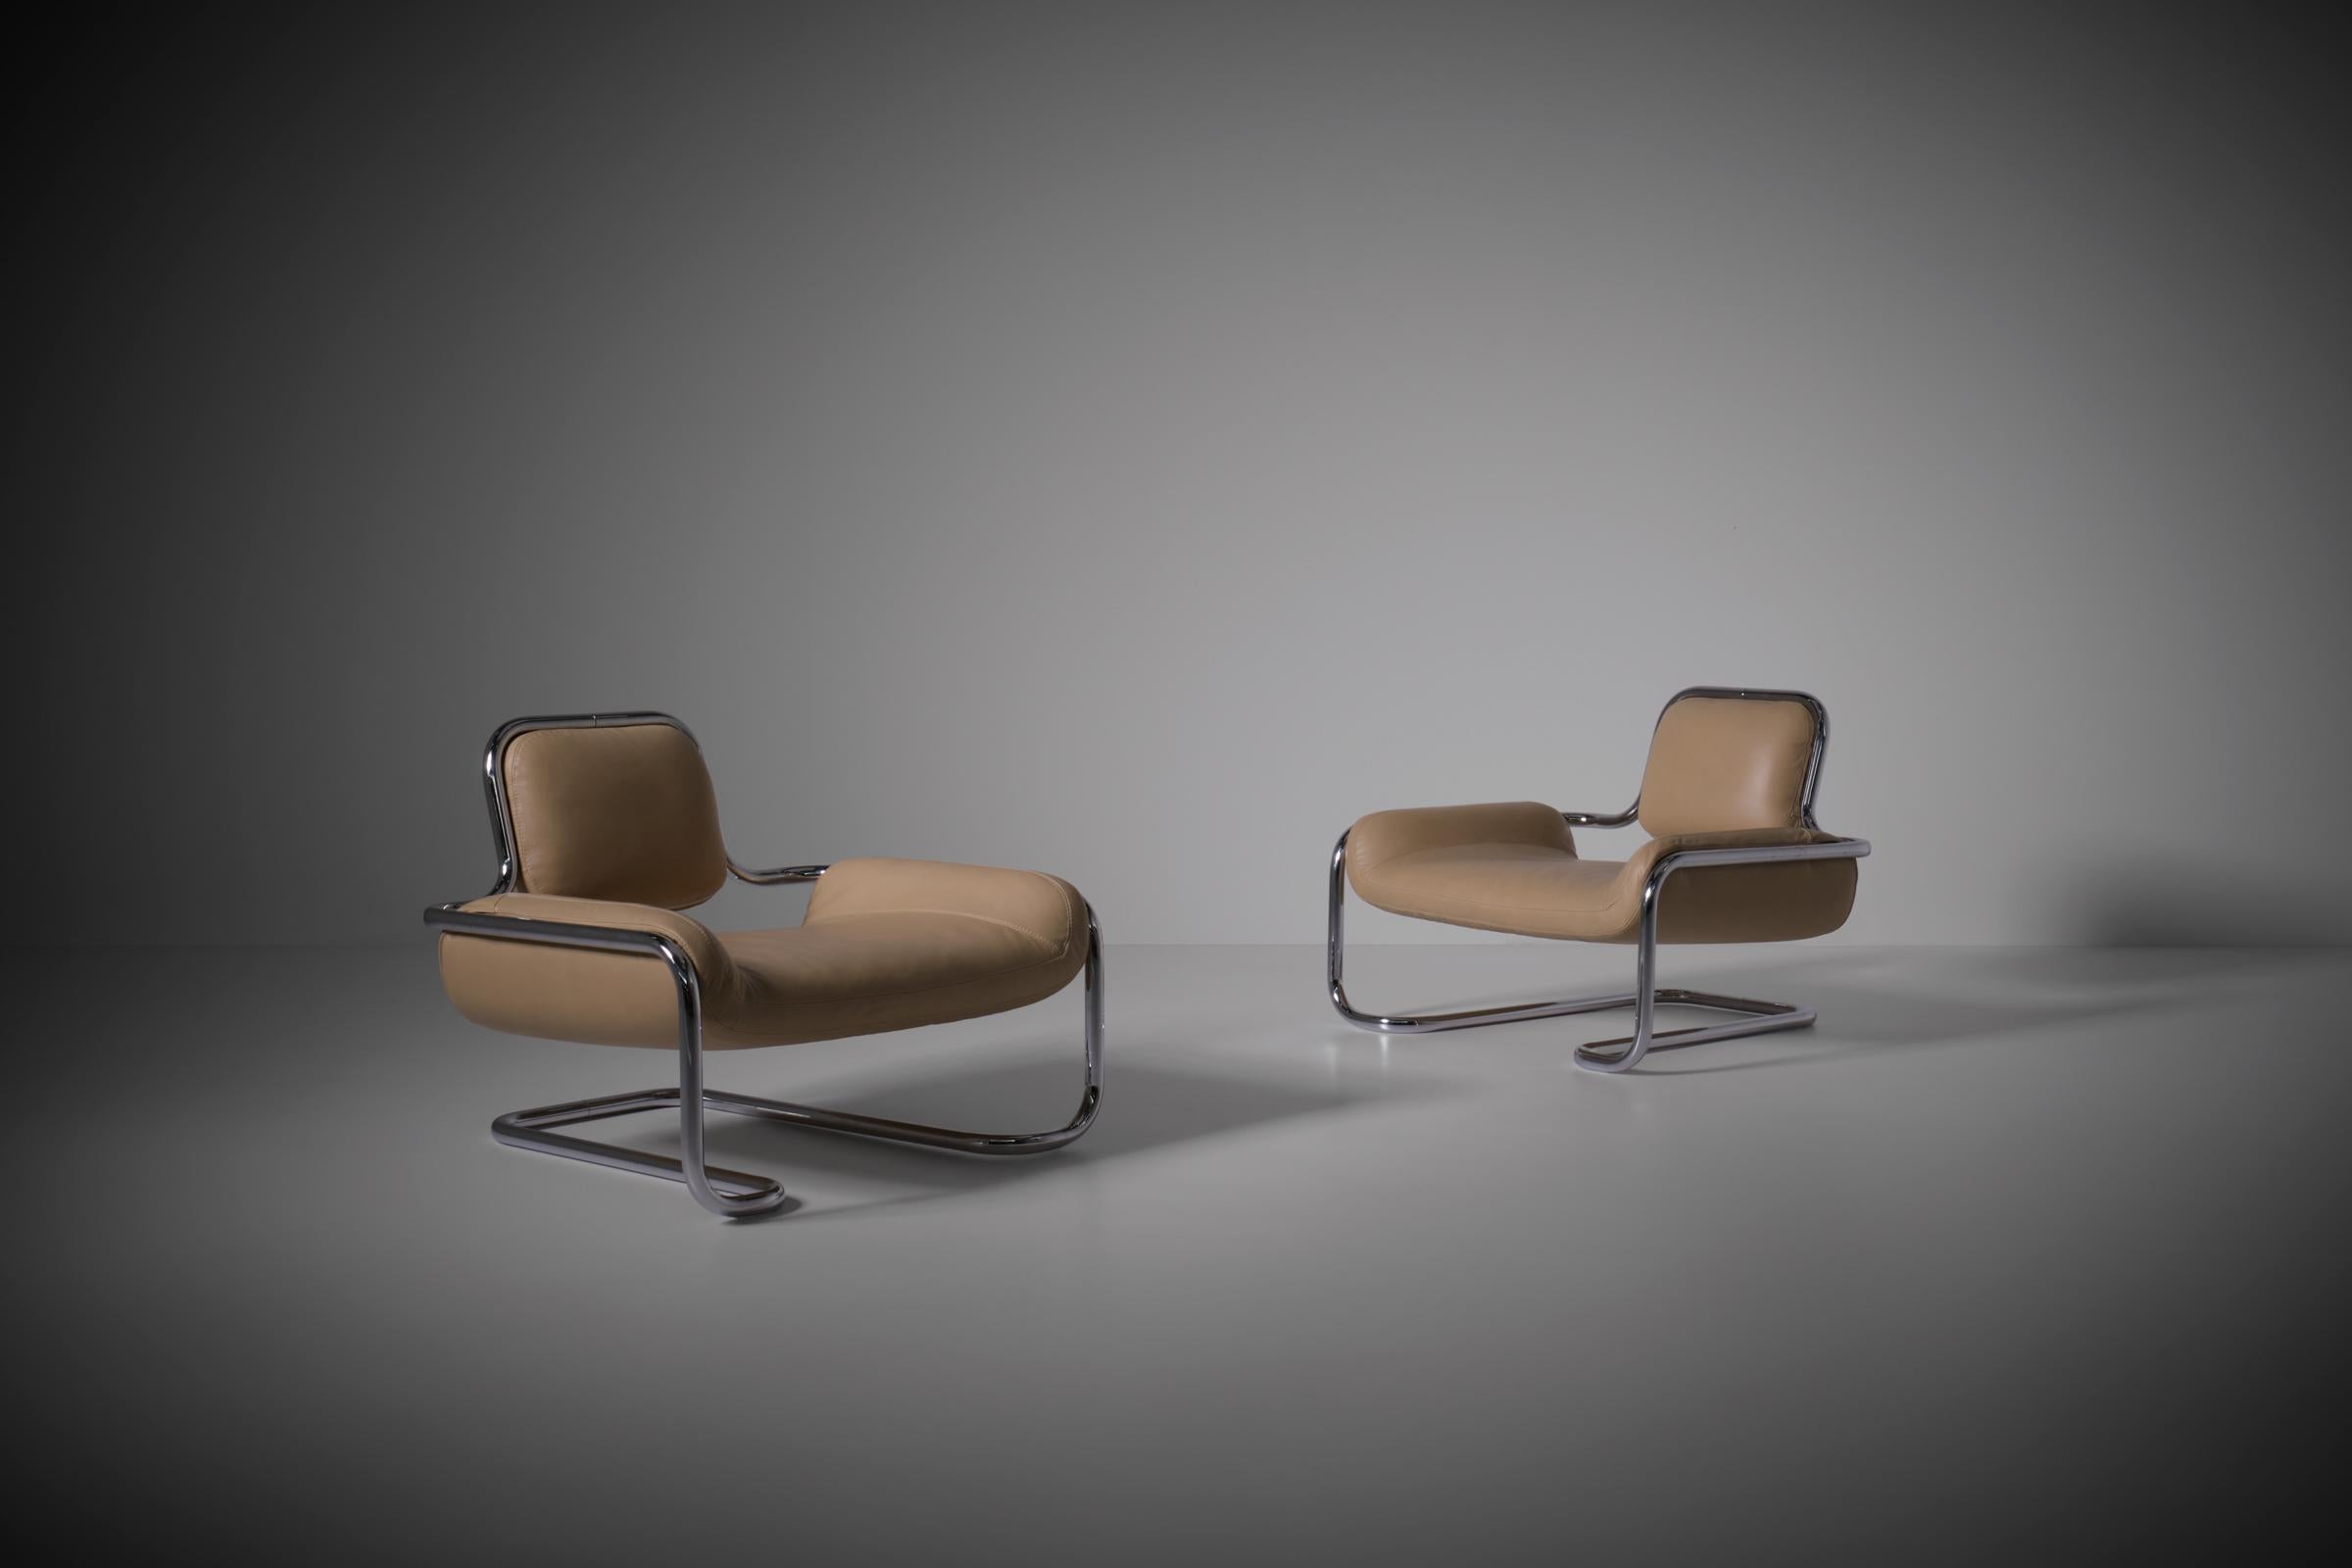 Iconic pair of ‘Lemon Sole’ chairs by Kwok Hoi Chan for Steiner, France 1969. Highly sought after and hard to find chairs produced by Steiner between 1969 until the end of the seventies. Kwok Hoi Chan, born in Hong Kong, moved to France and made